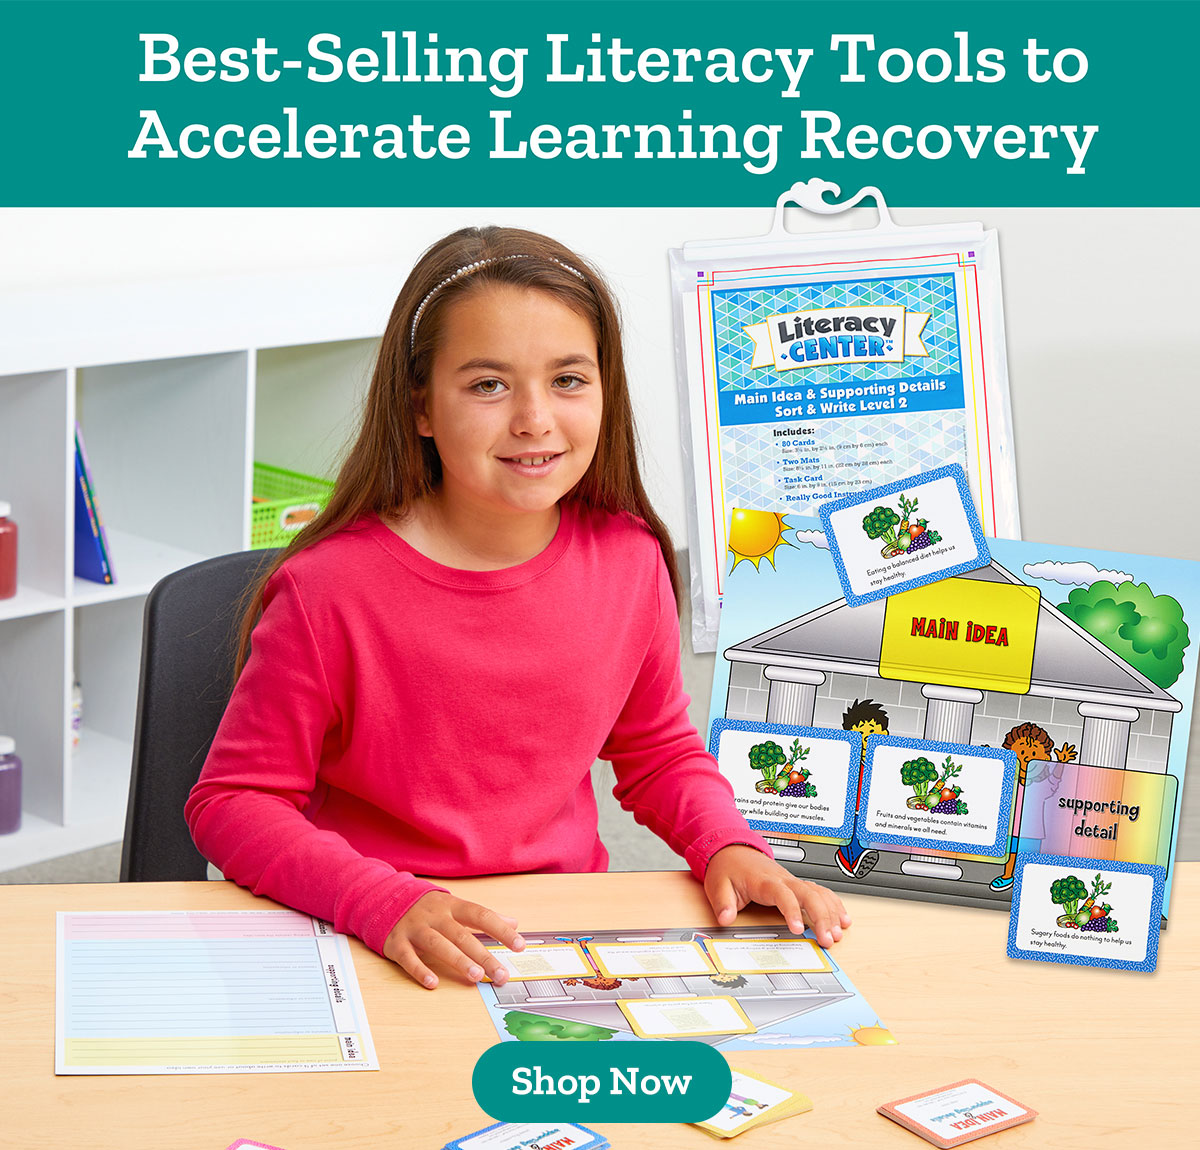 Best-Selling Literacy Tools to Accelerate Learning Recovery